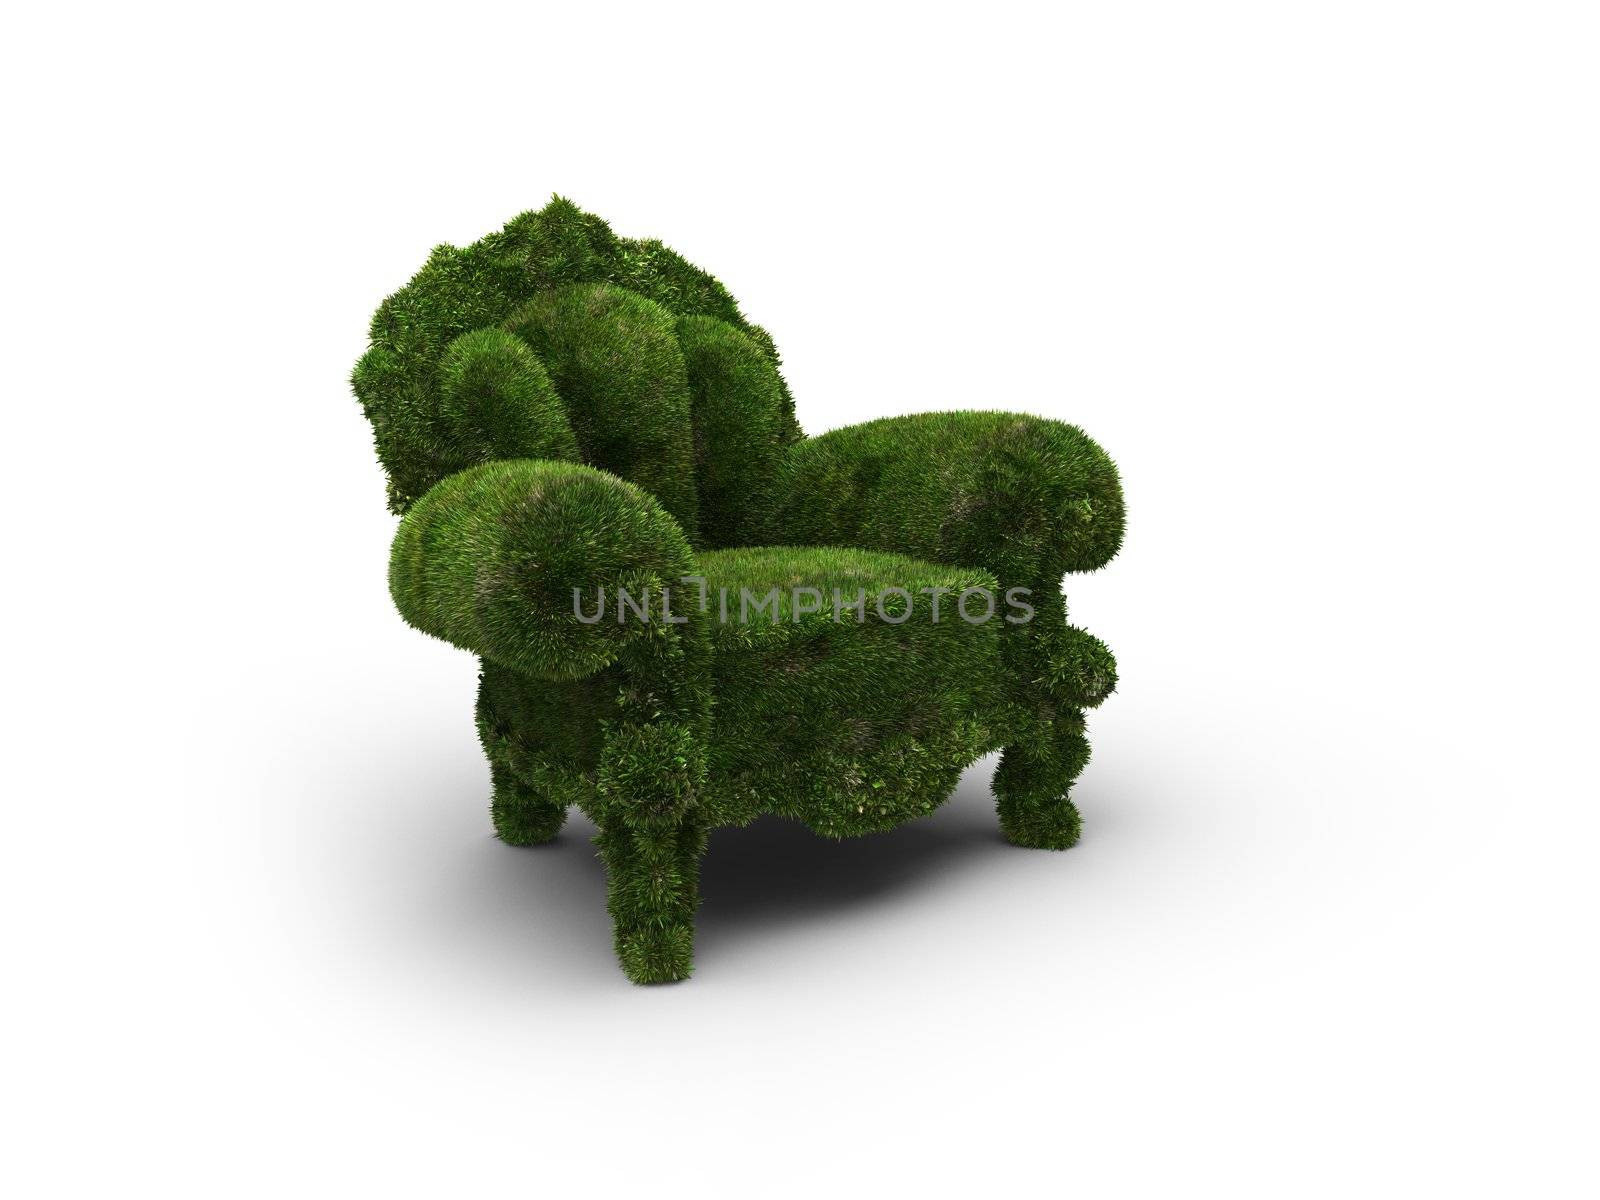 chair designed as an herbal by icetray